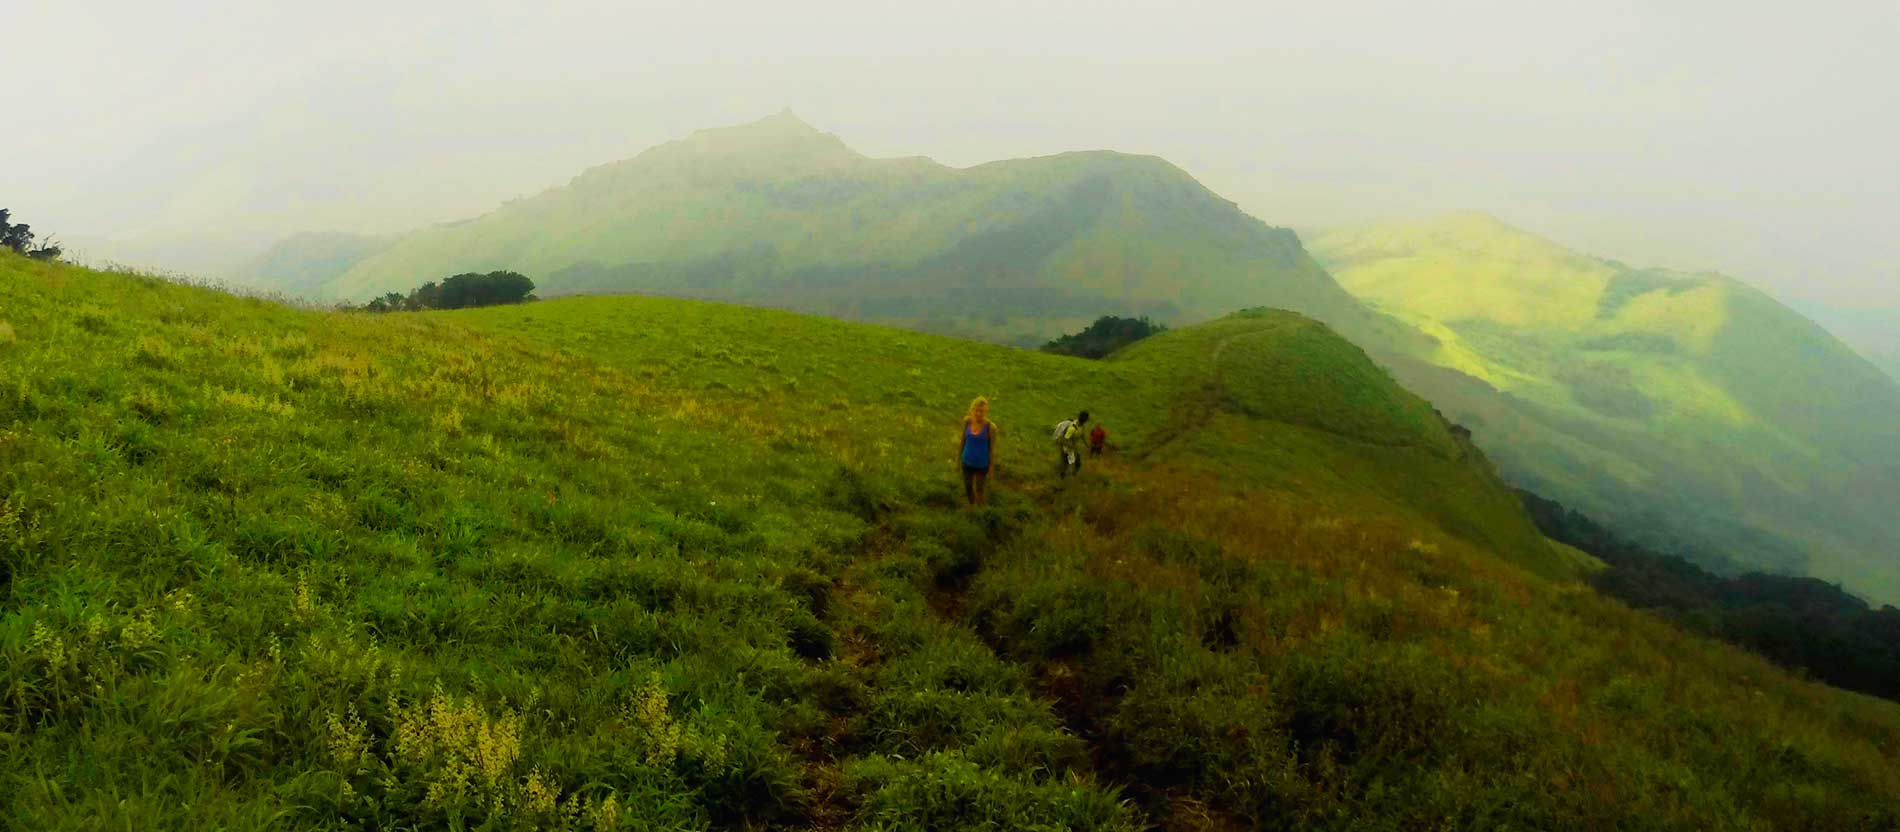 There are plenty of offbeat trails on offer when you go backpacking India